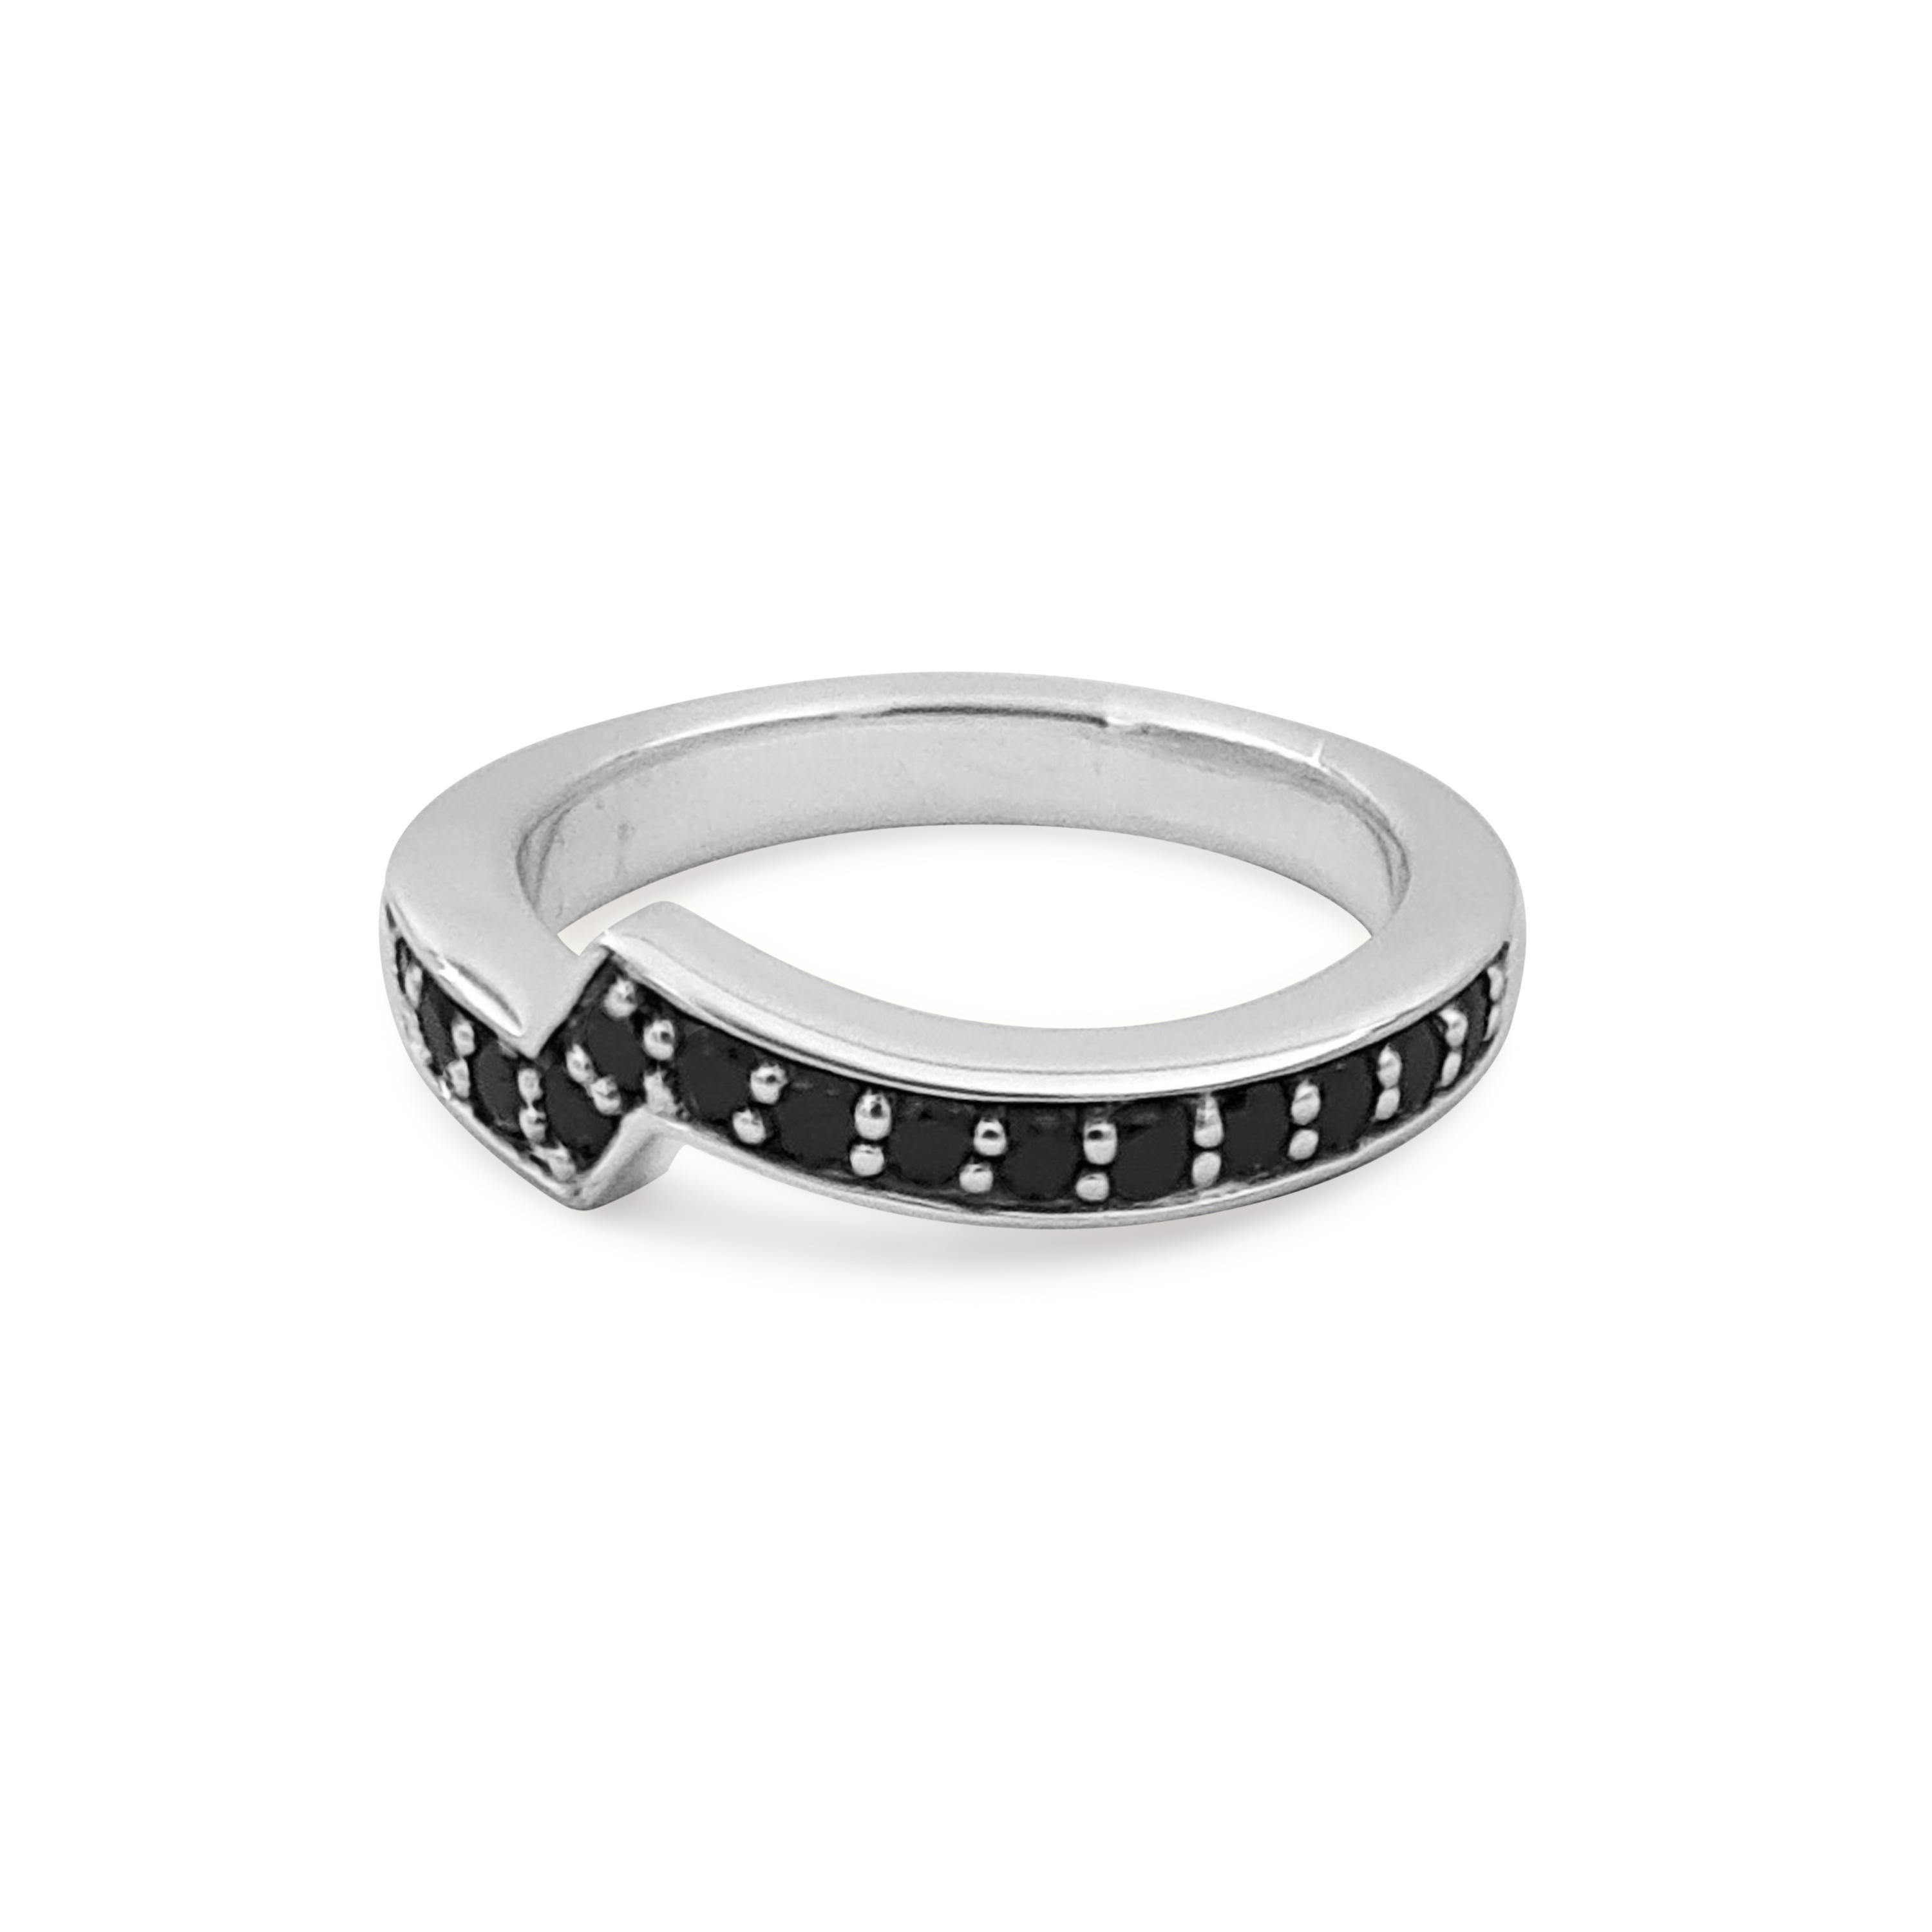 Indulge in the timeless sophistication of the Black Diamond 1ct Ring from Stephen Dweck's Kyoto Collection. Meticulously crafted in 925 sterling silver, this ring, measuring at 0.89